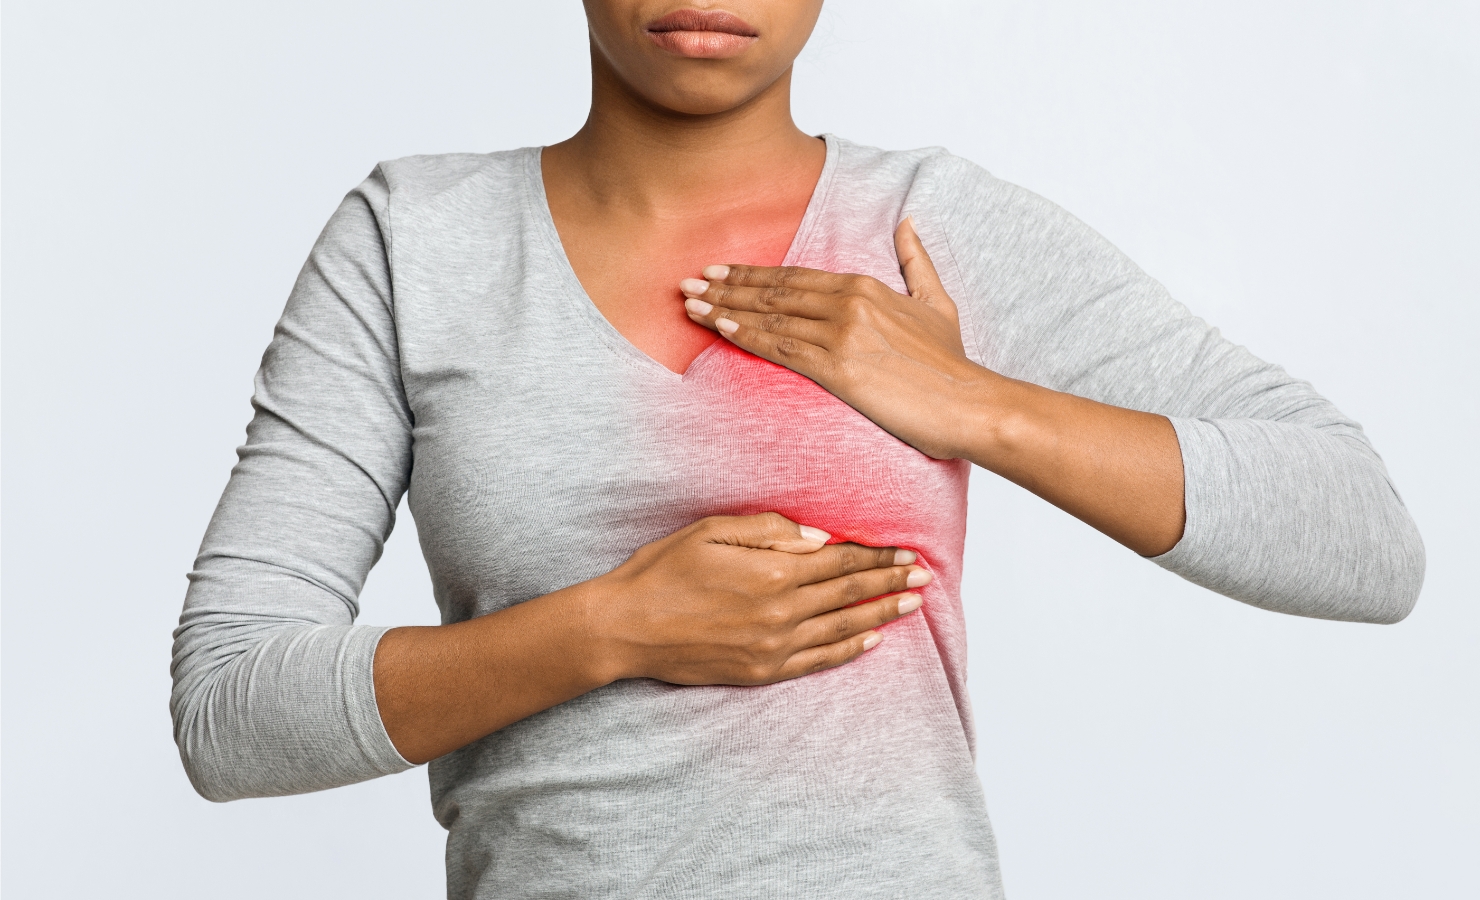 Breast Tenderness: What Is It & What Causes Sore Breasts?